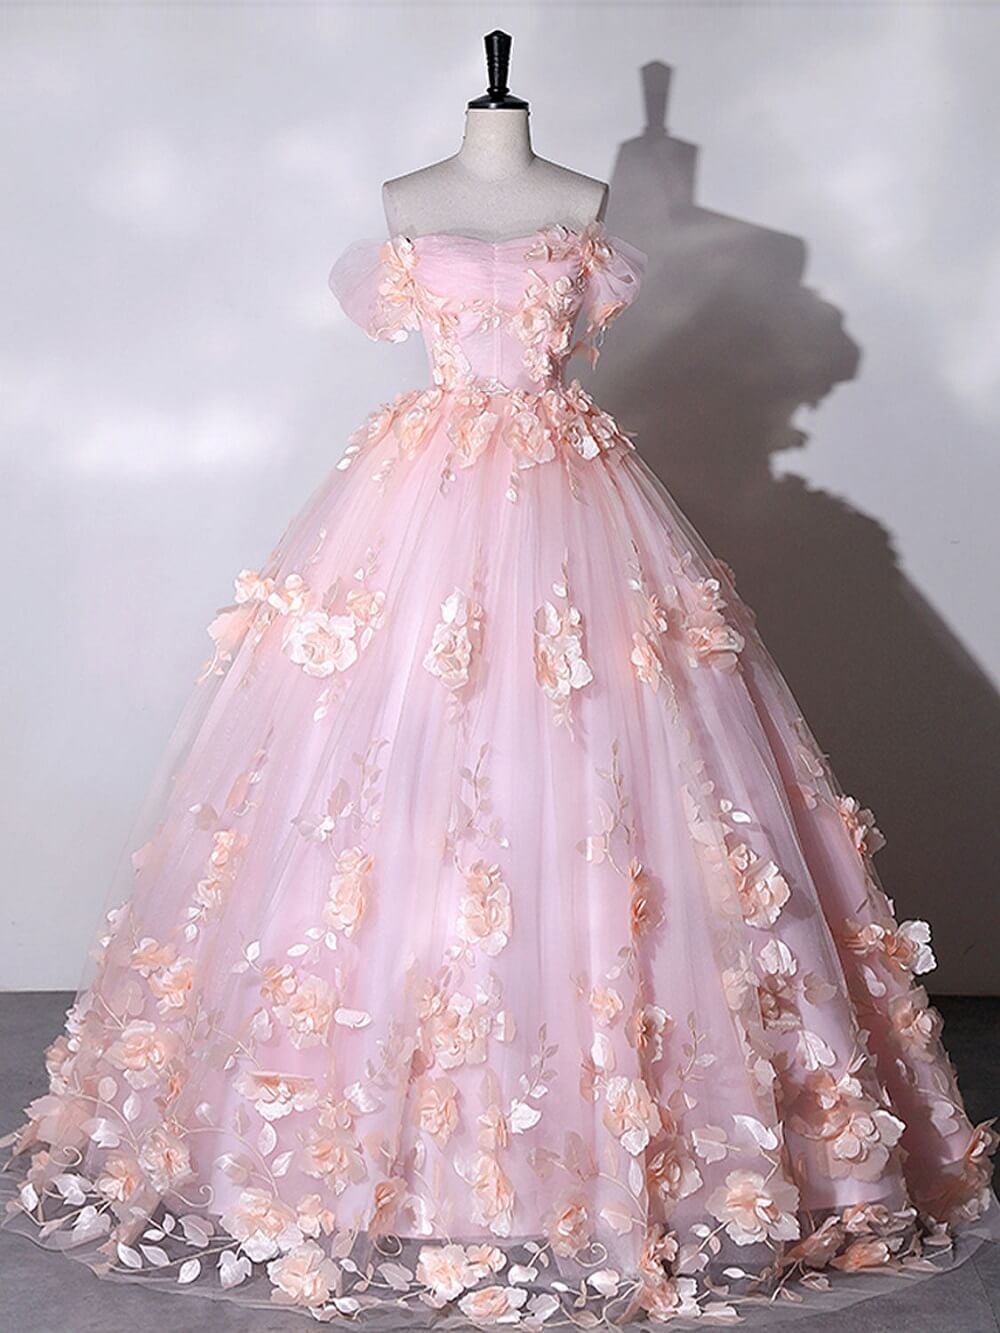 Bridesmaid Dress Champagne, Stunning Pink Floral Off the Shoulder Prom Dresses Ball Gown Quinceanera Dress